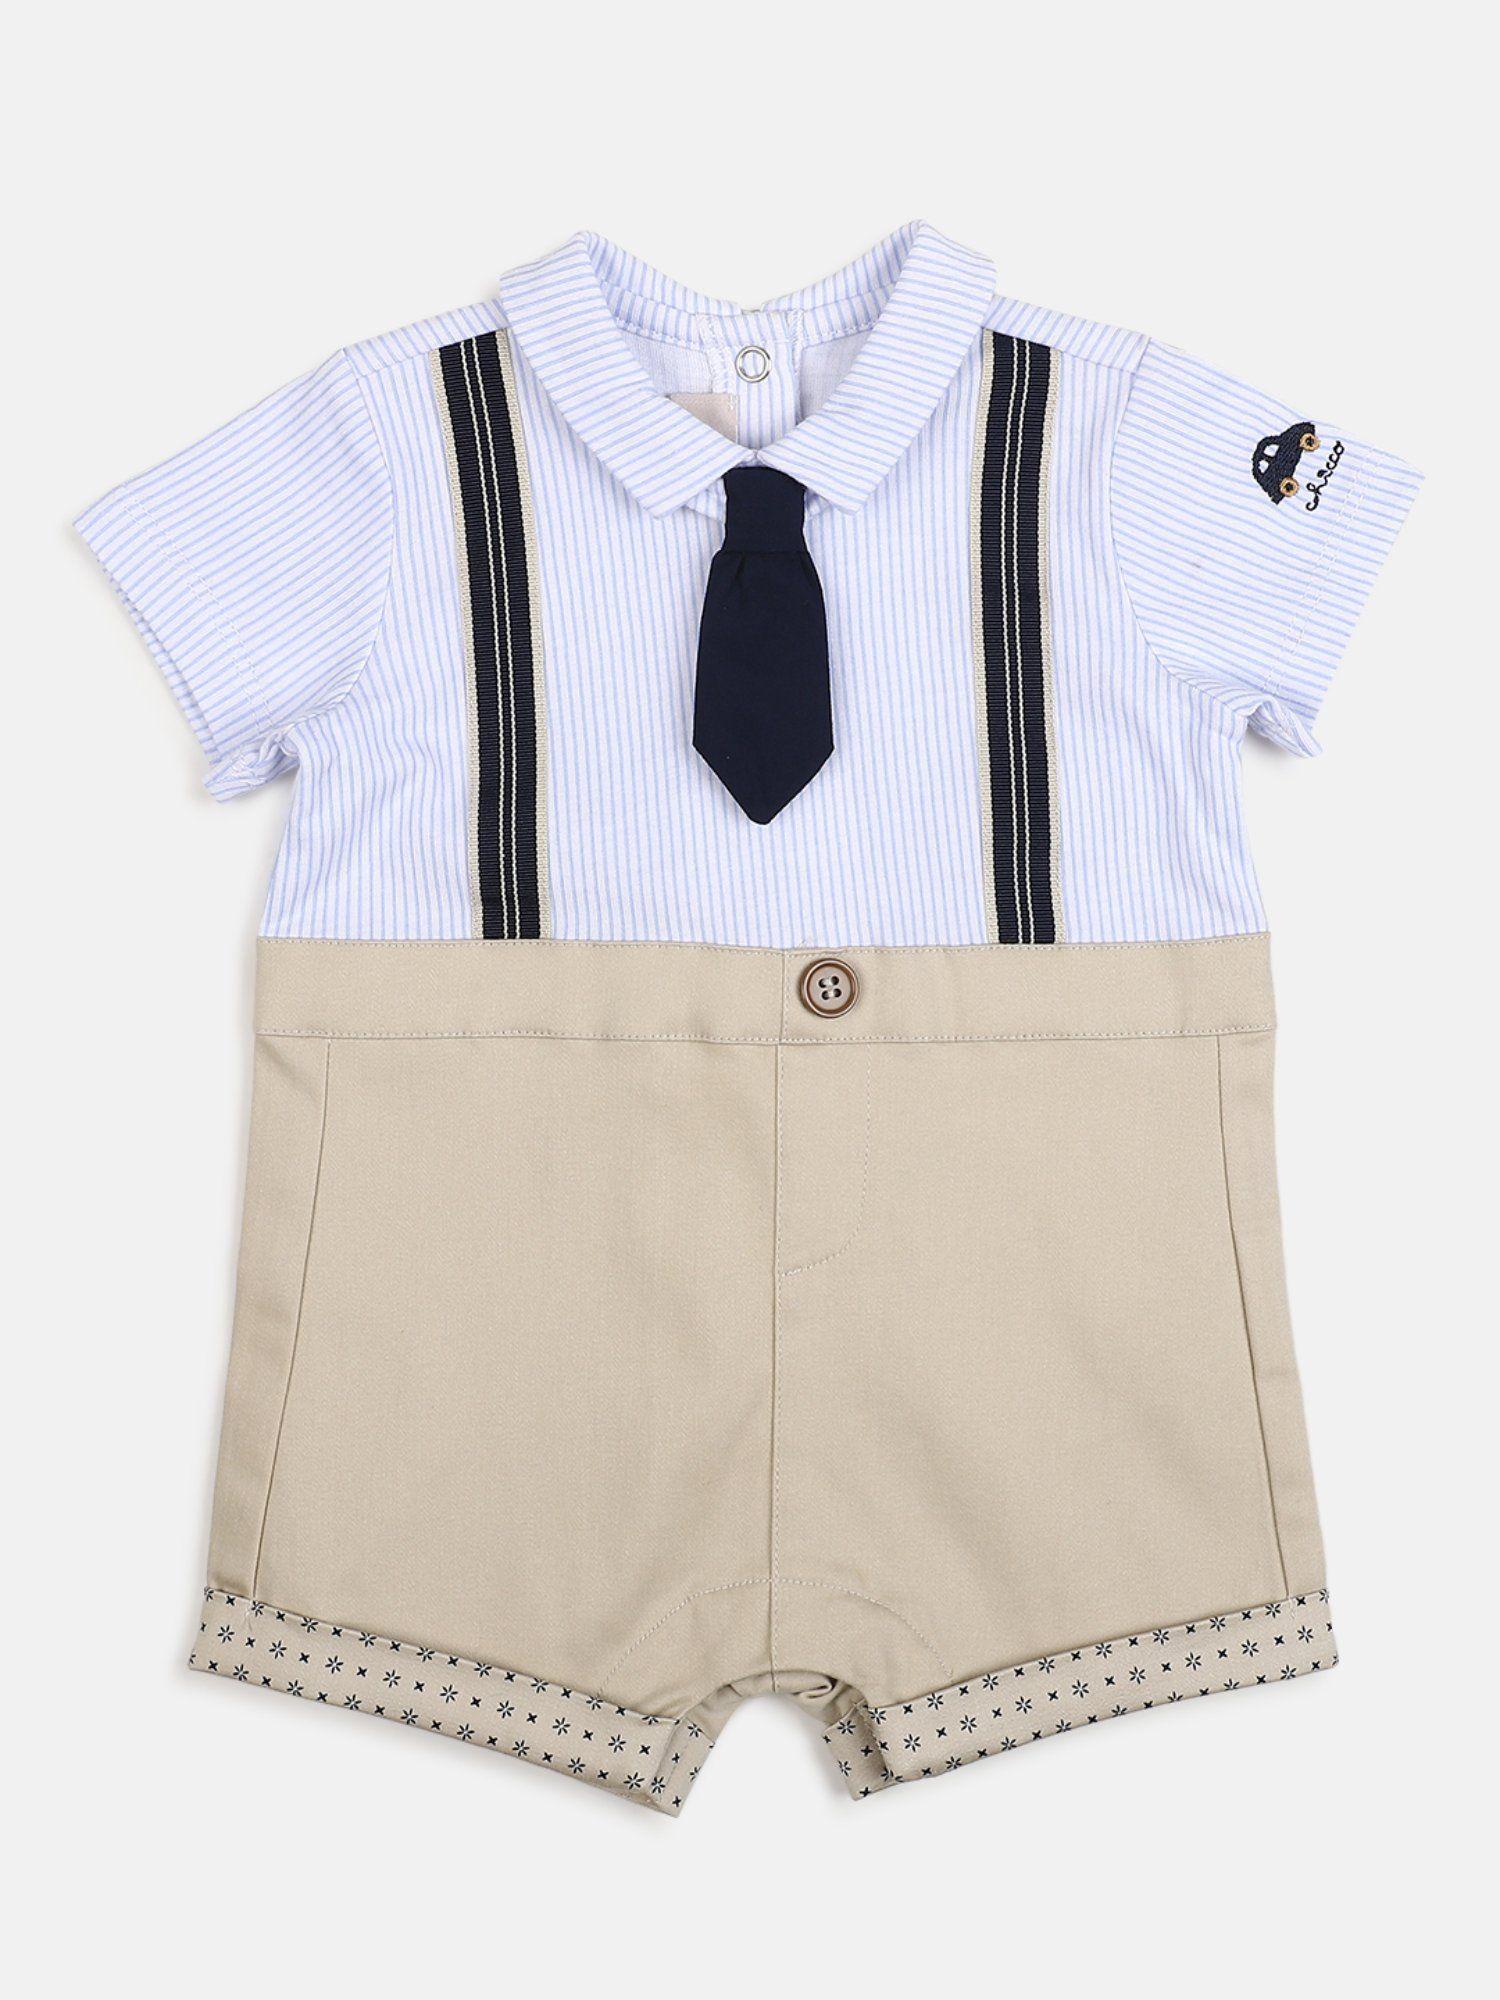 boys-multi-color-striped-short-sleeve-bodysuit-with-tie-(set-of-2)